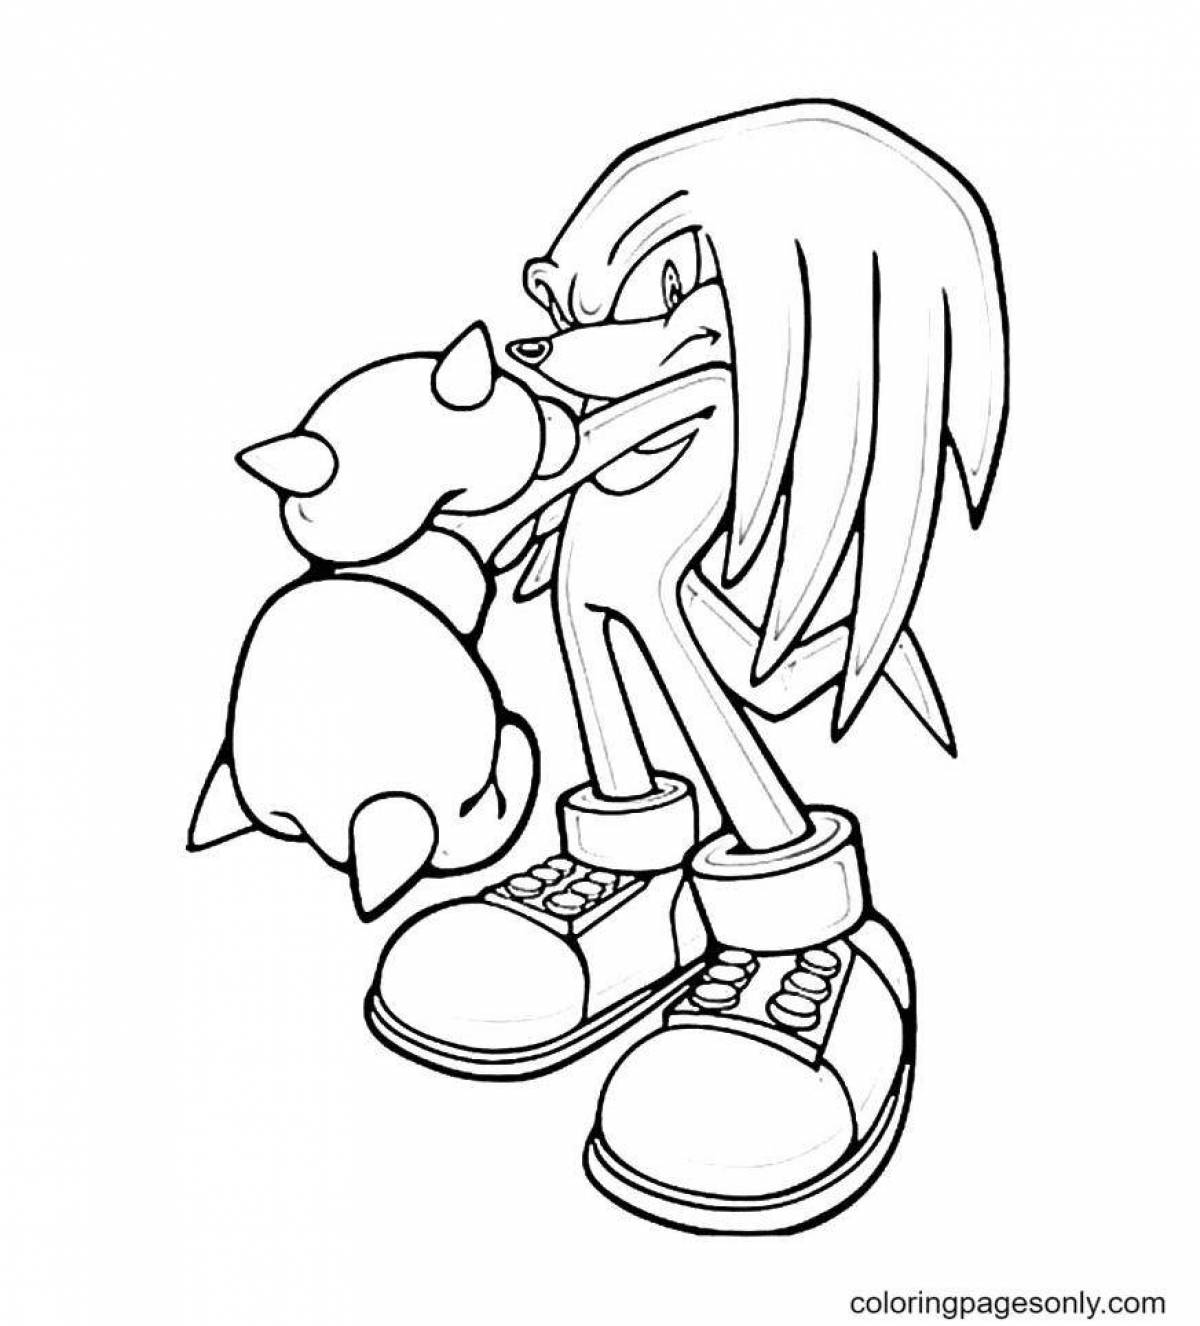 Knuckles echidna creative coloring